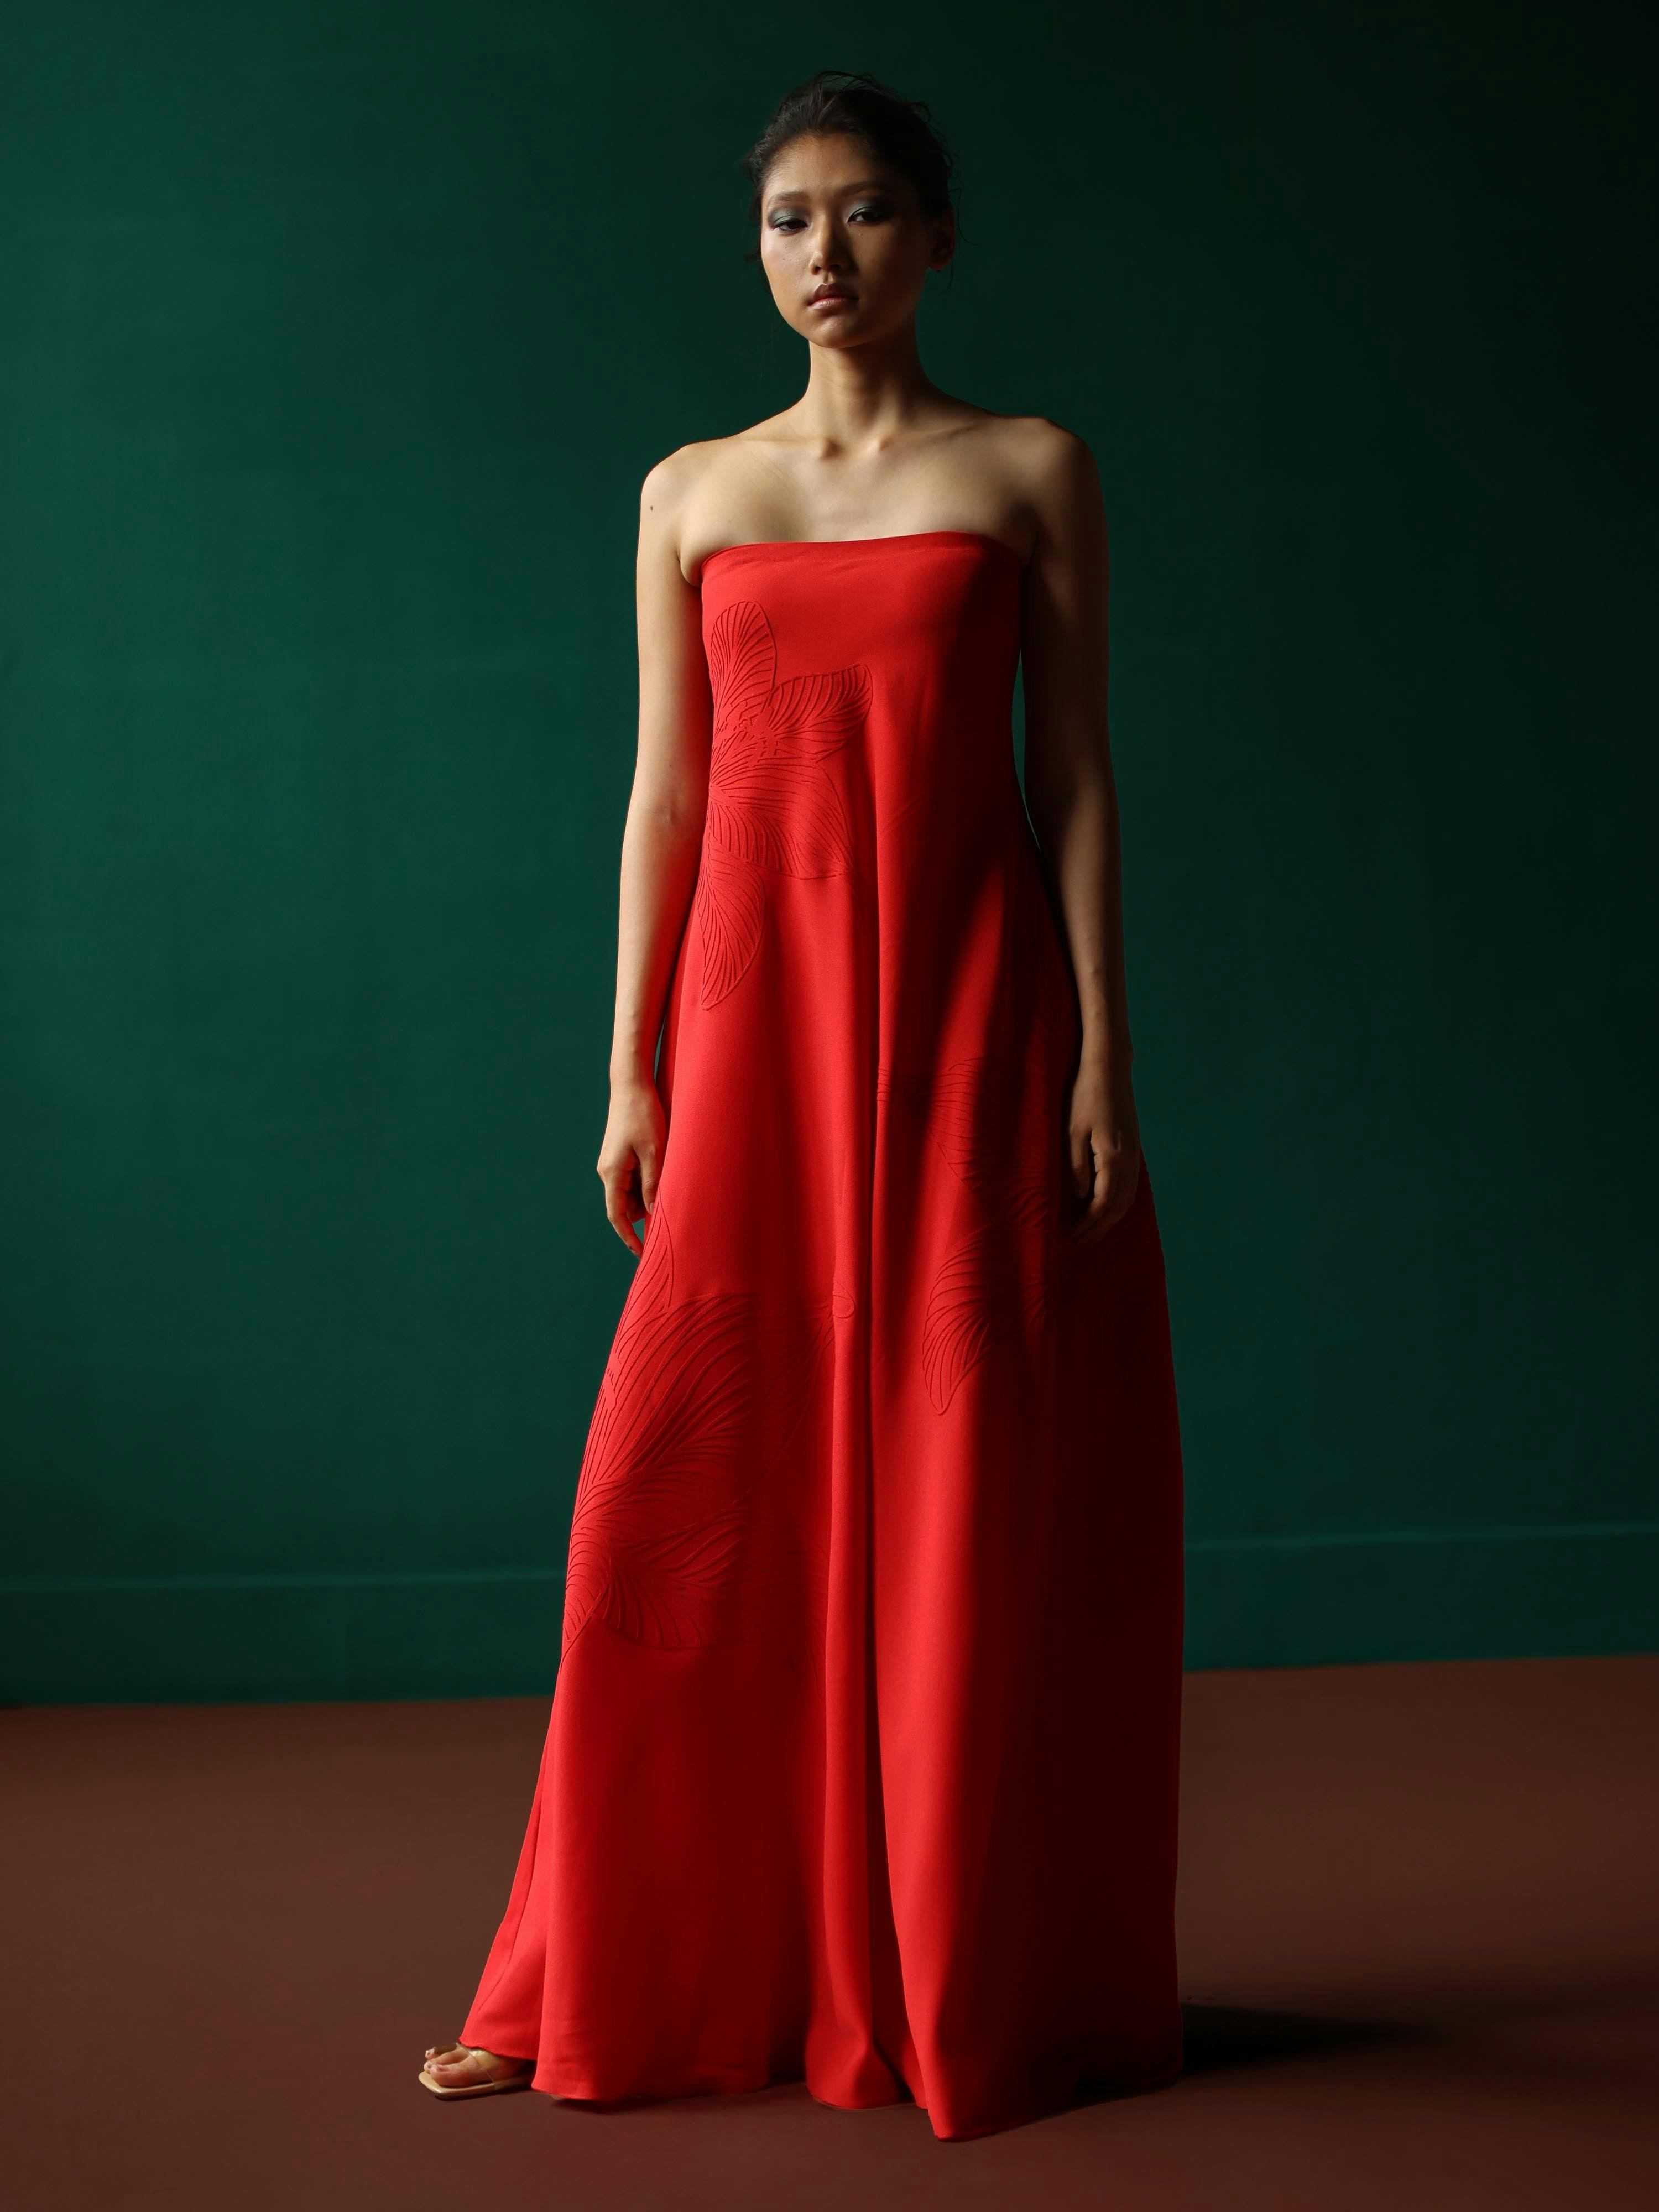 Strapless maxi dress with embossed lillies, a product by Shriya Khanna